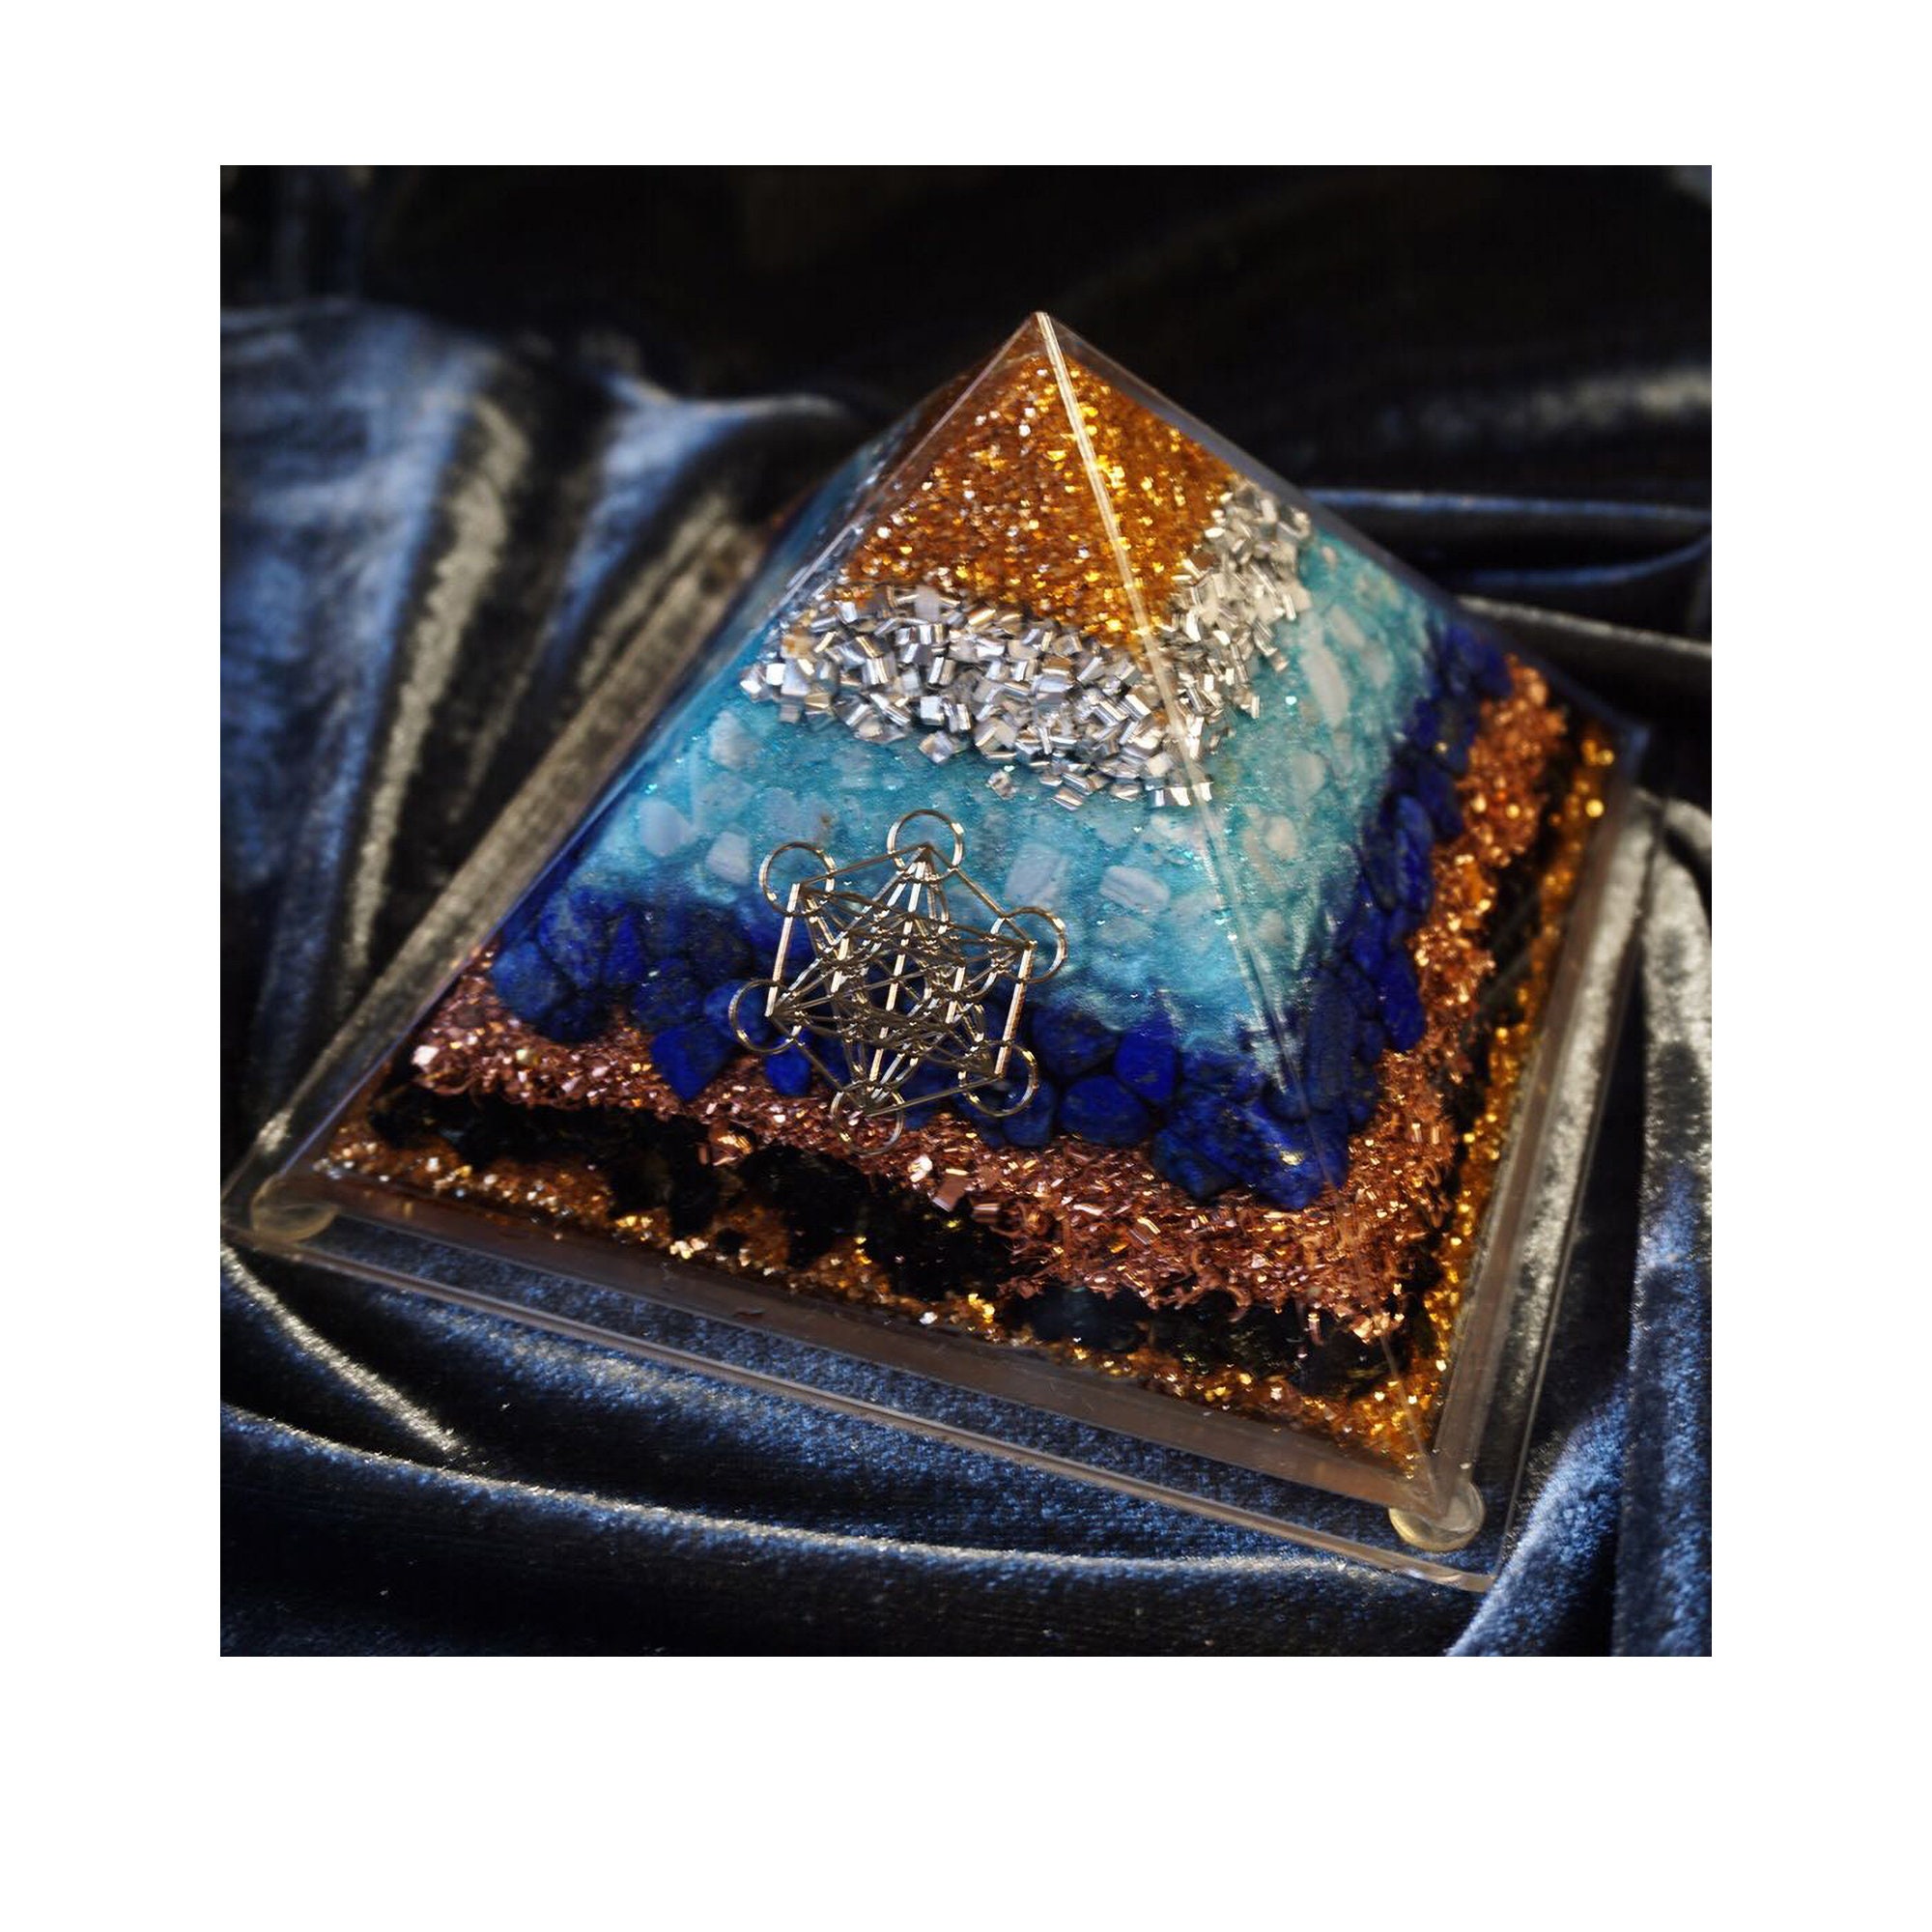 Pyramid Molds For Resin,large Silicone Pyramid Molds,silicone Resin Molds  For Diy Orgonite Orgone Pyramid, Orgonite Jewelry,great For Paperweight,  Hom